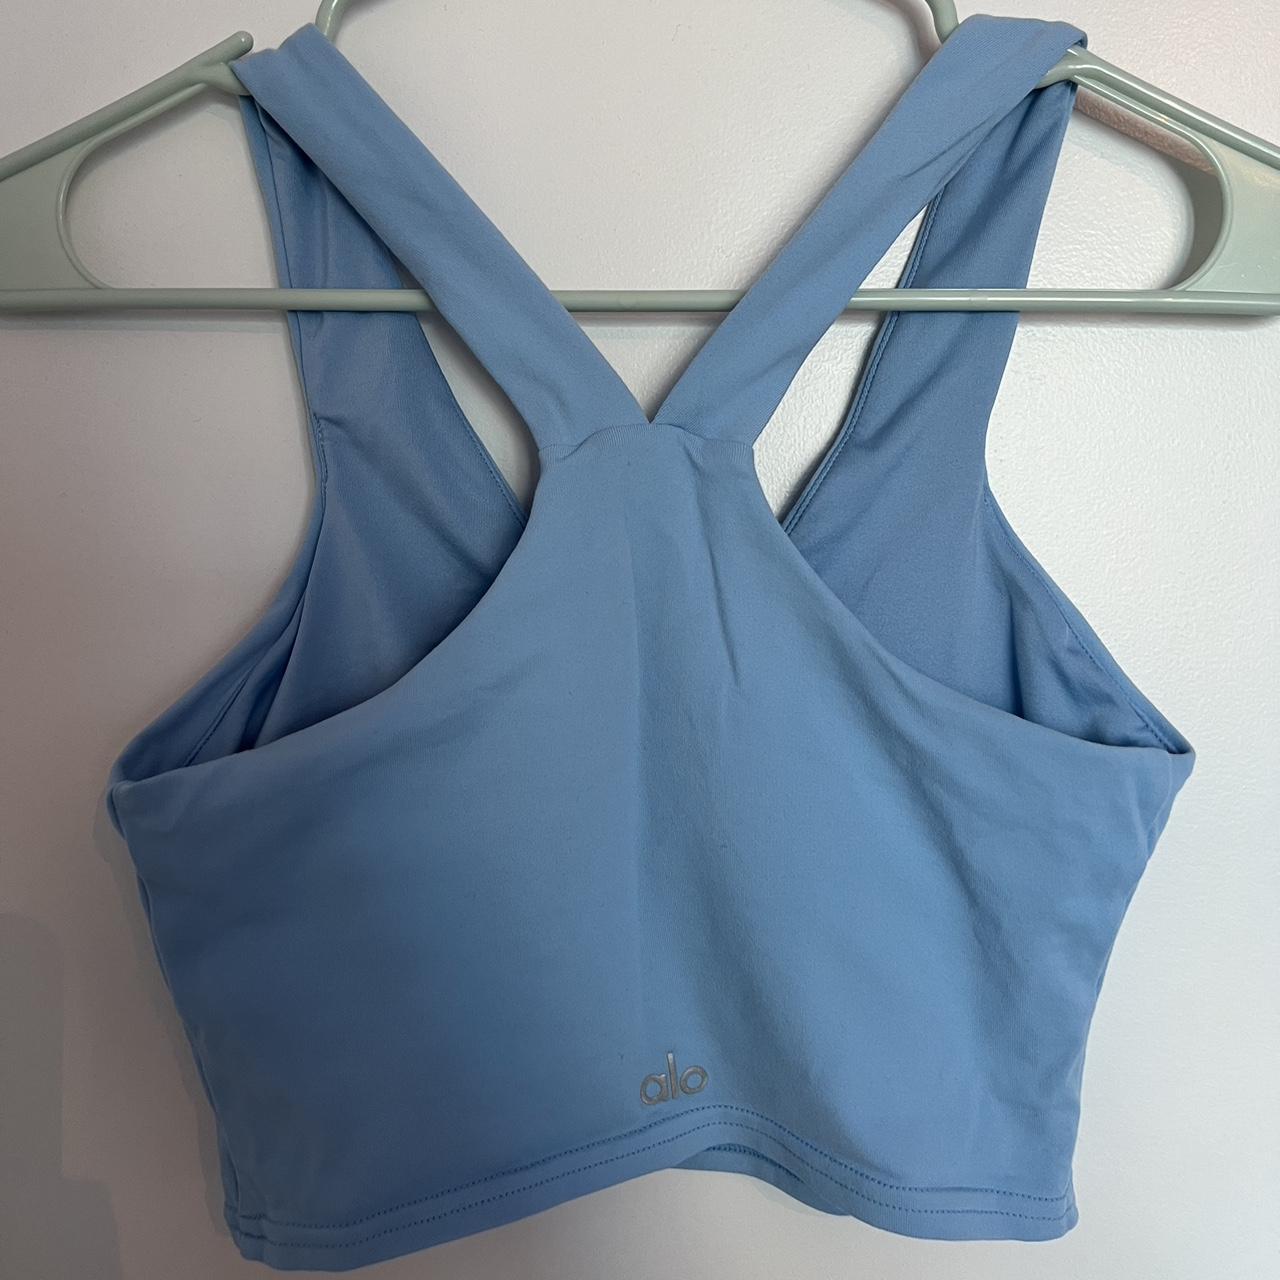 small, Alo sports bra, navy blue, took the cups - Depop